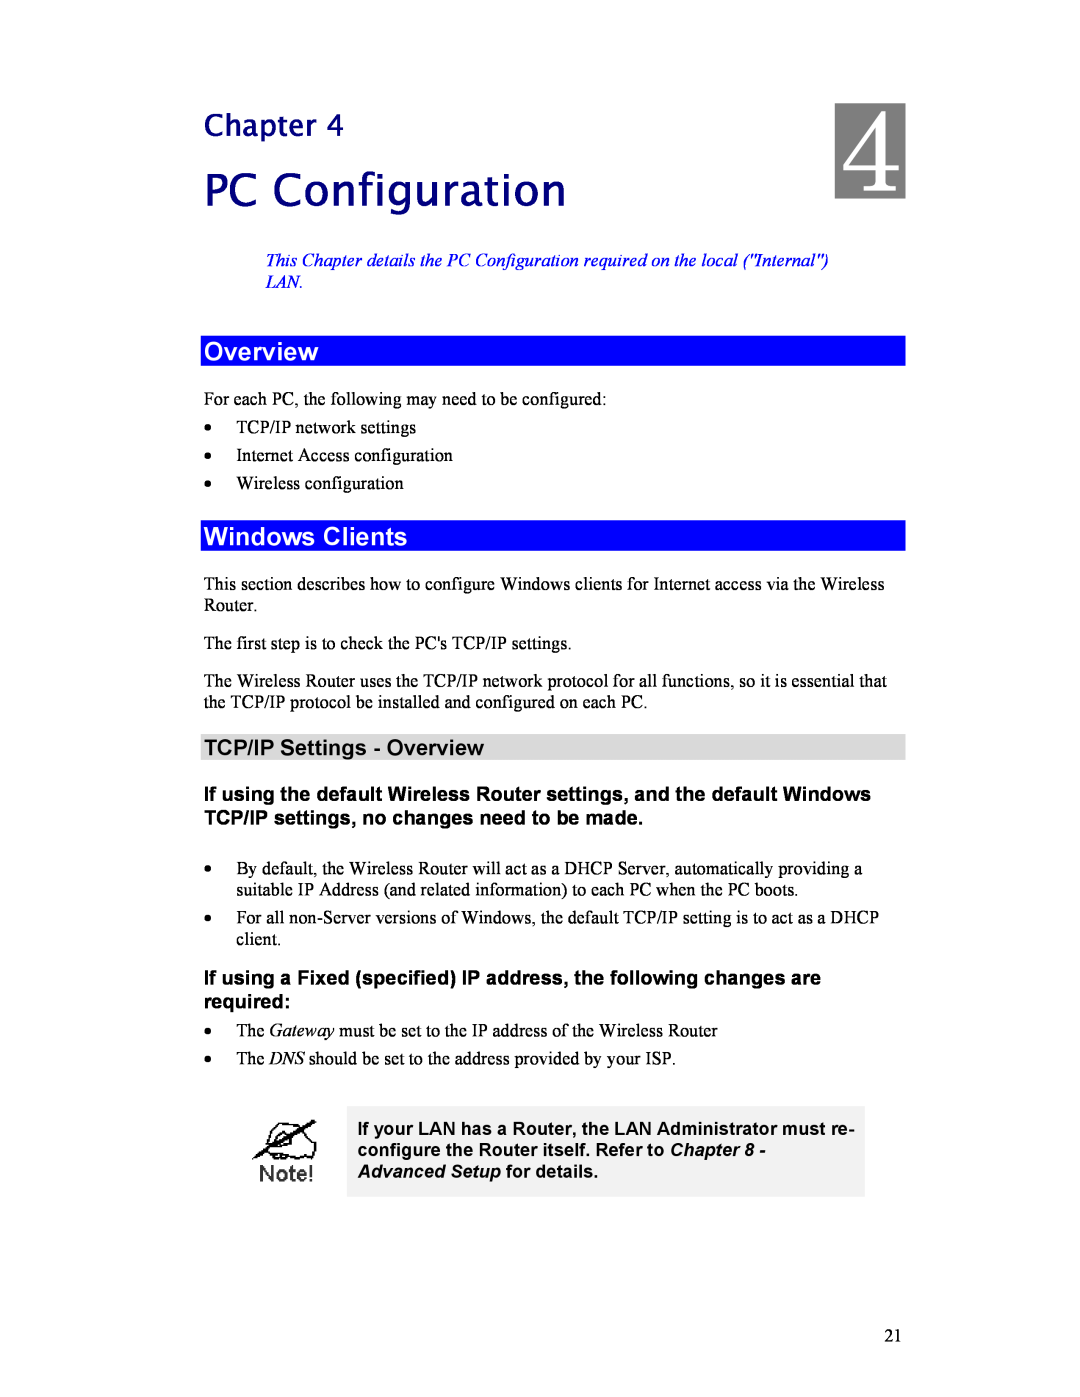 Hawking Technology HWR54G manual PC Configuration, Windows Clients, TCP/IP Settings - Overview, Chapter 